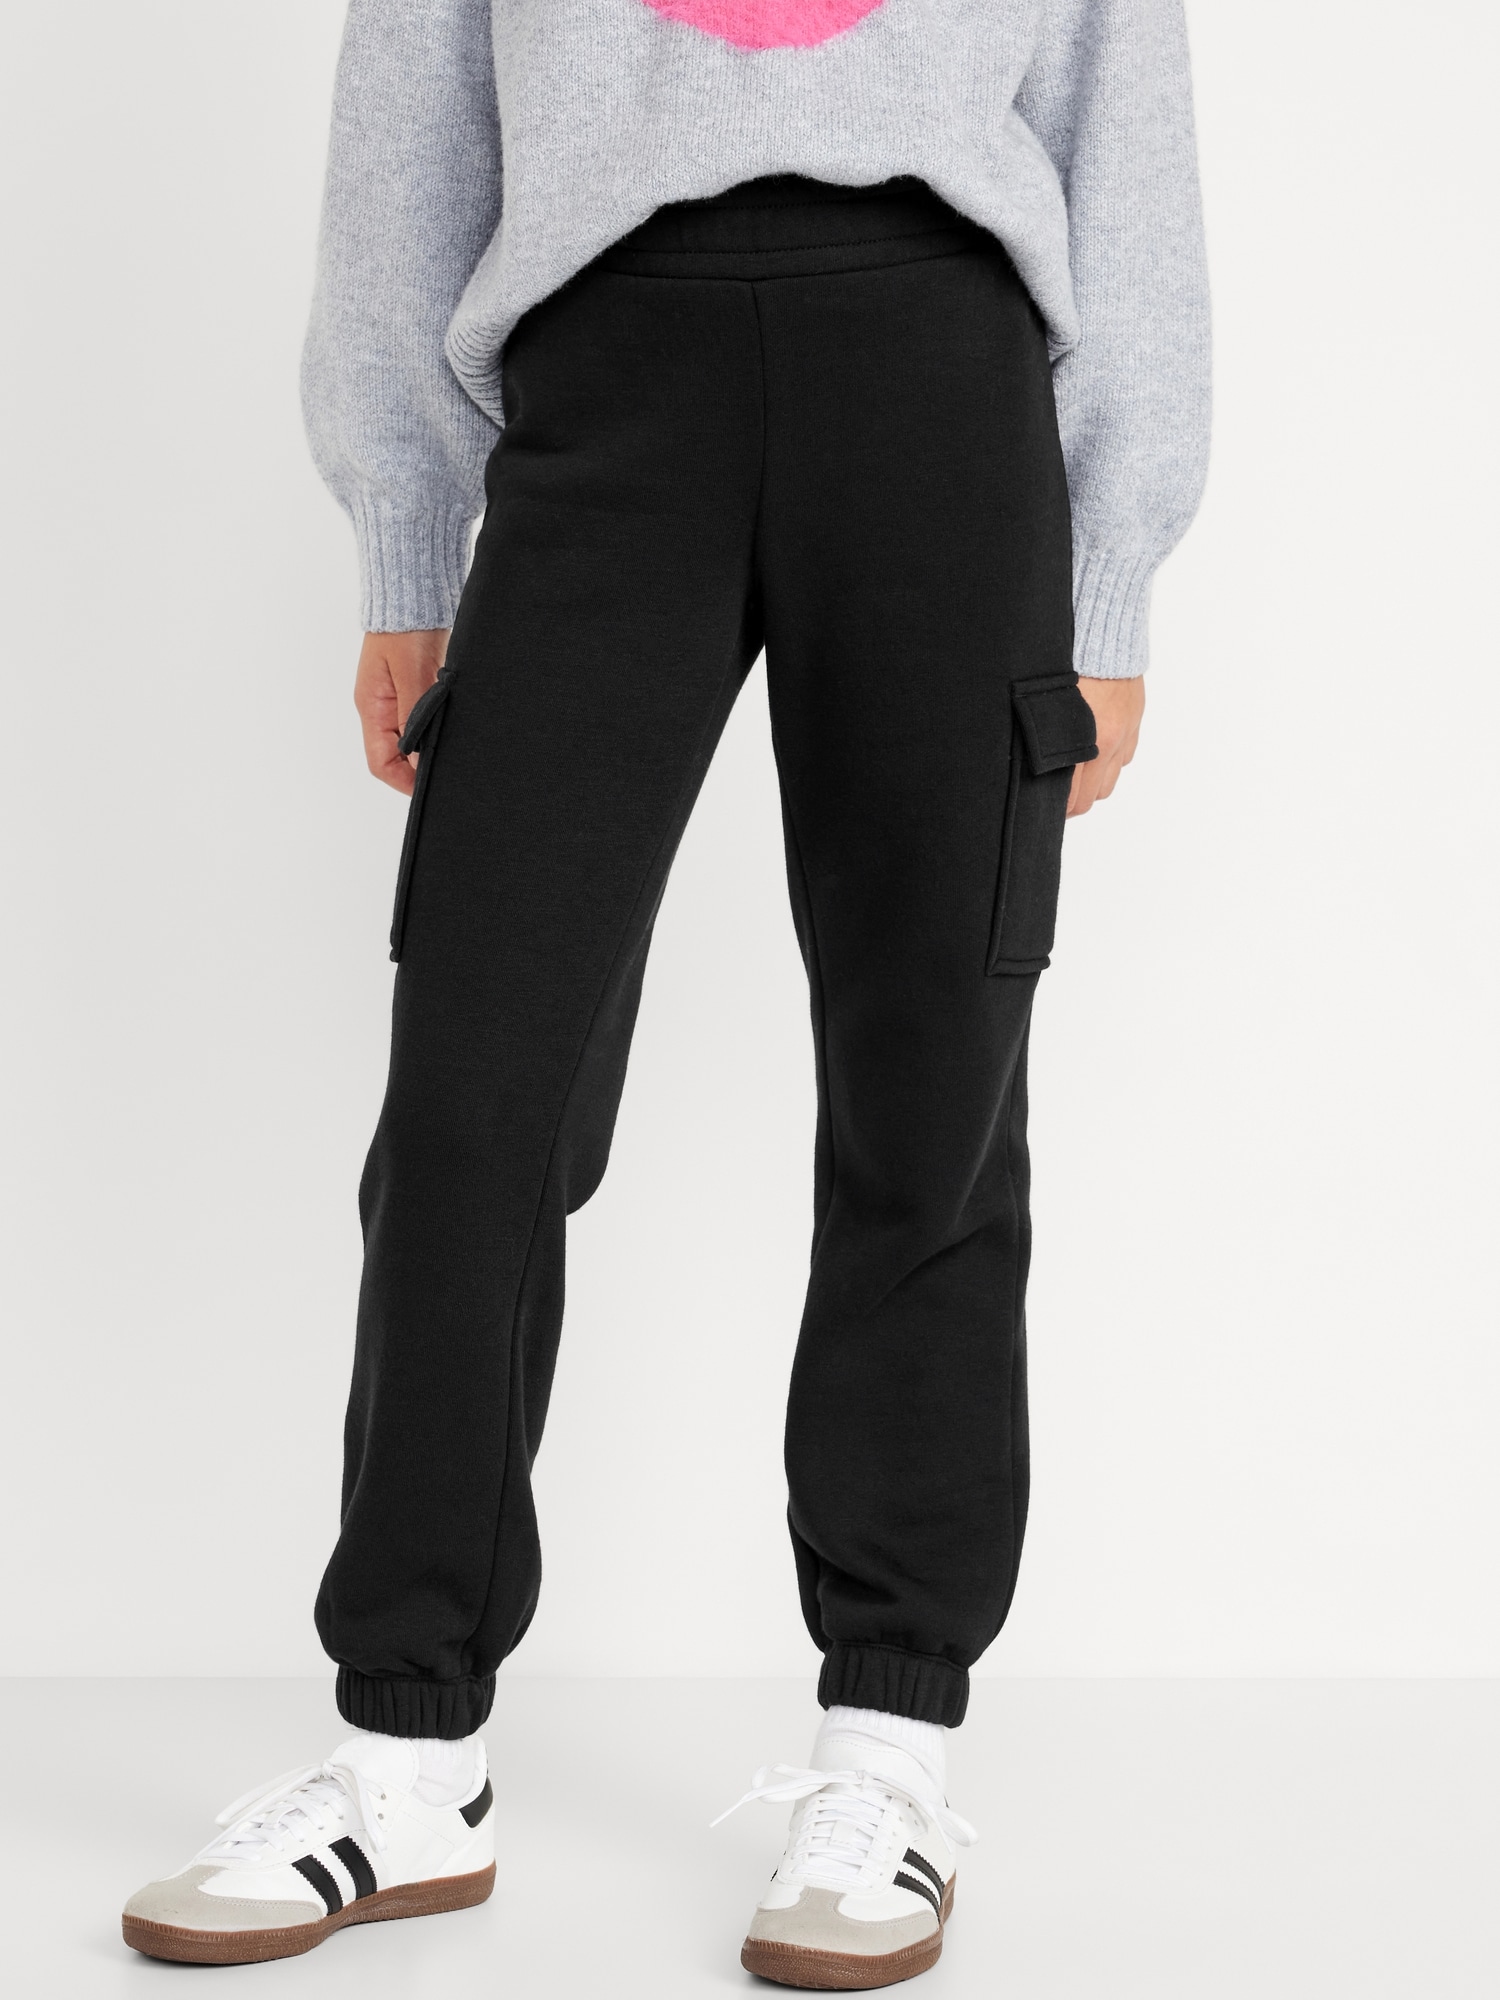 Buy Jogger Pants For Girls Online in India | Myntra